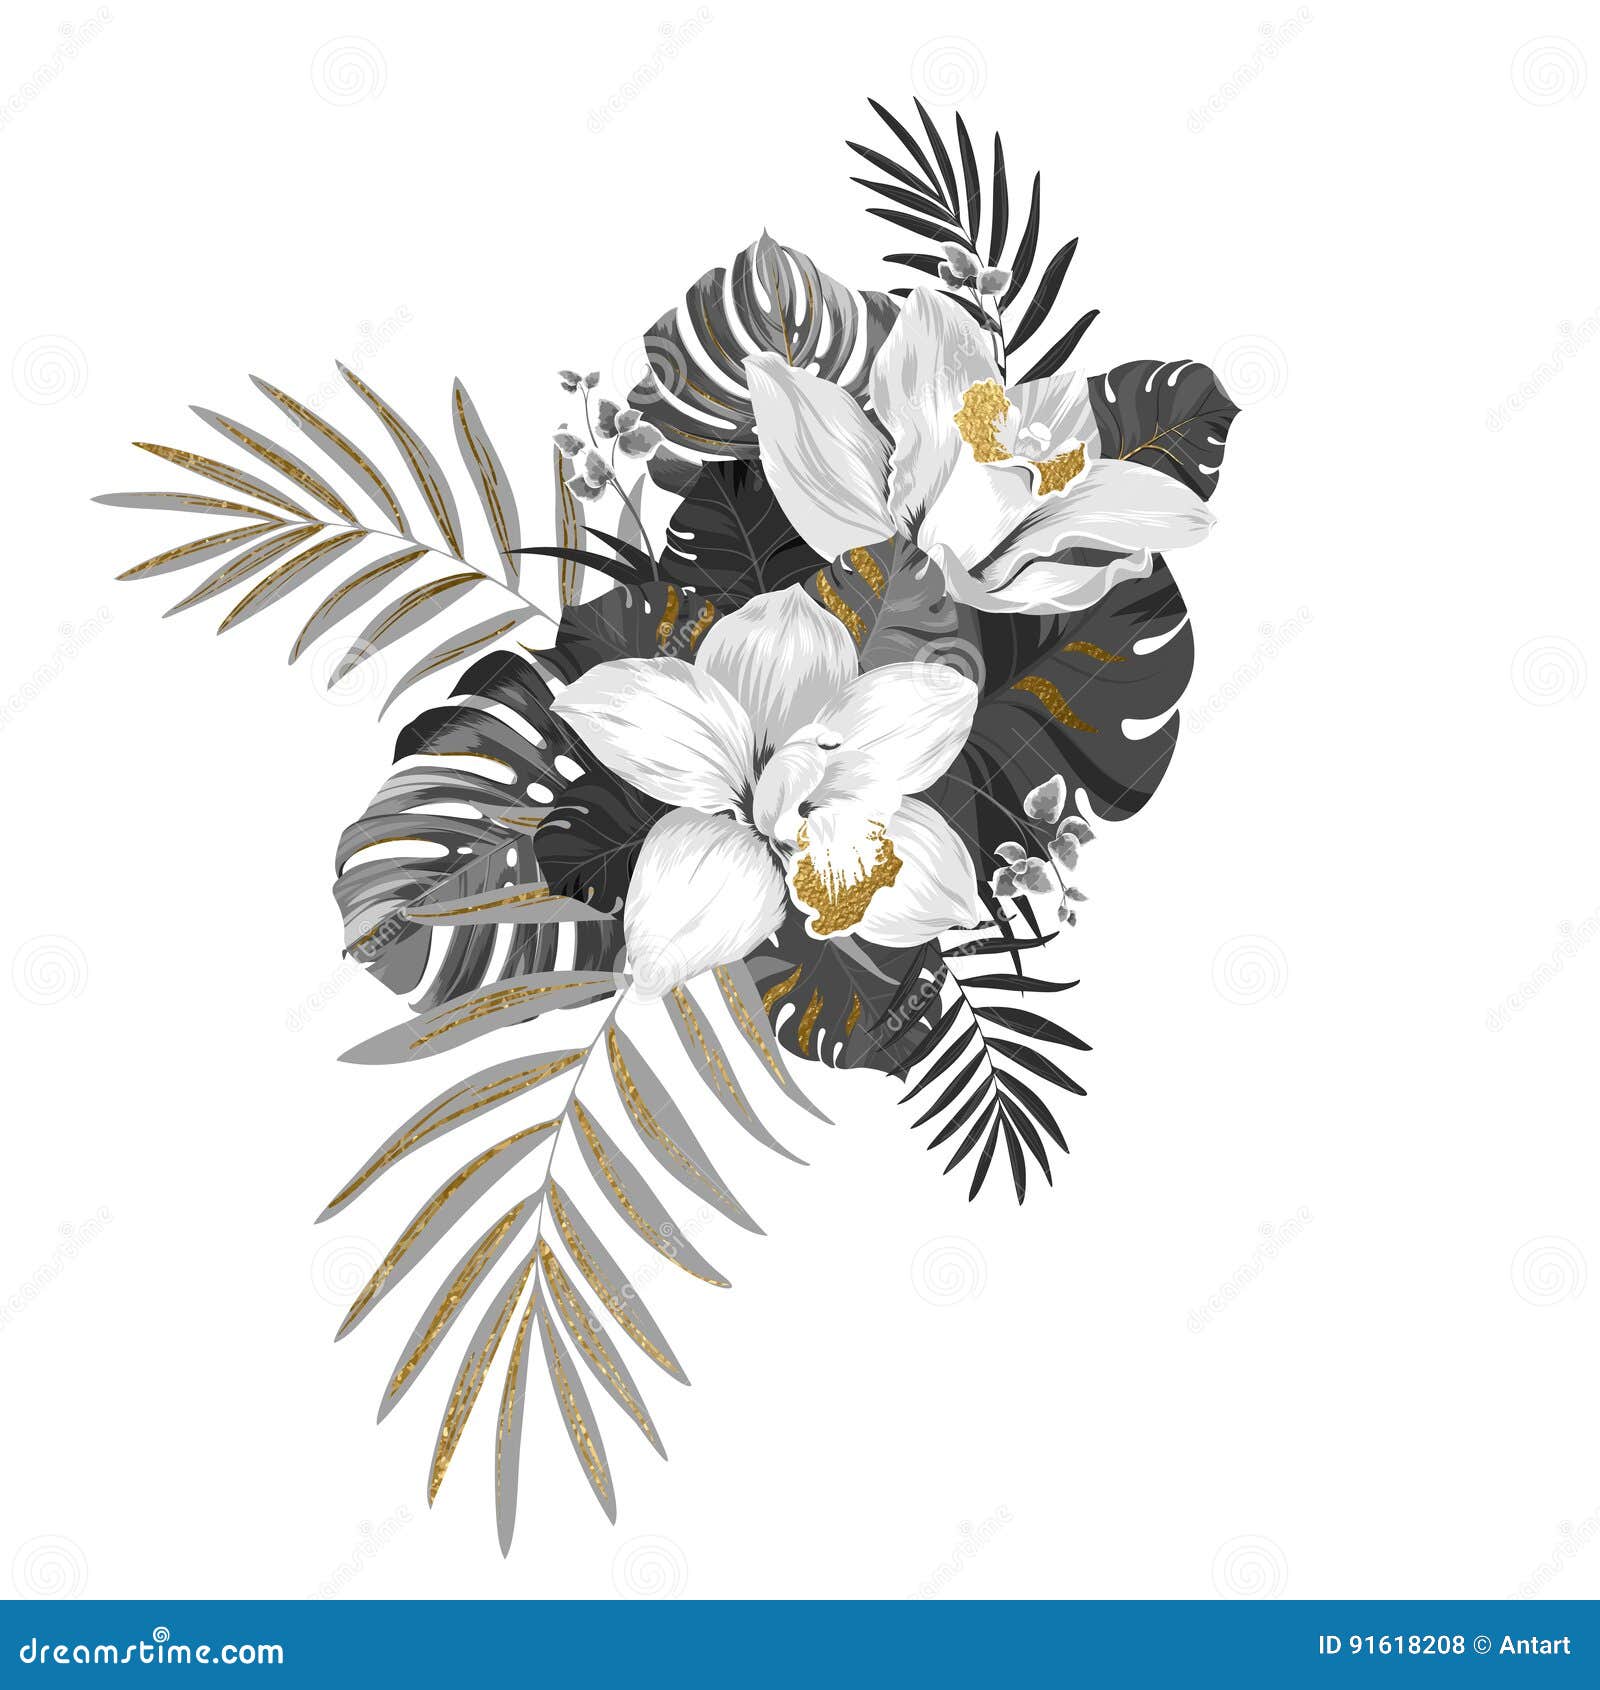 monochrome composition with exotic plants. two orchids, leaves of monstera and palm decorated by gold texture s.